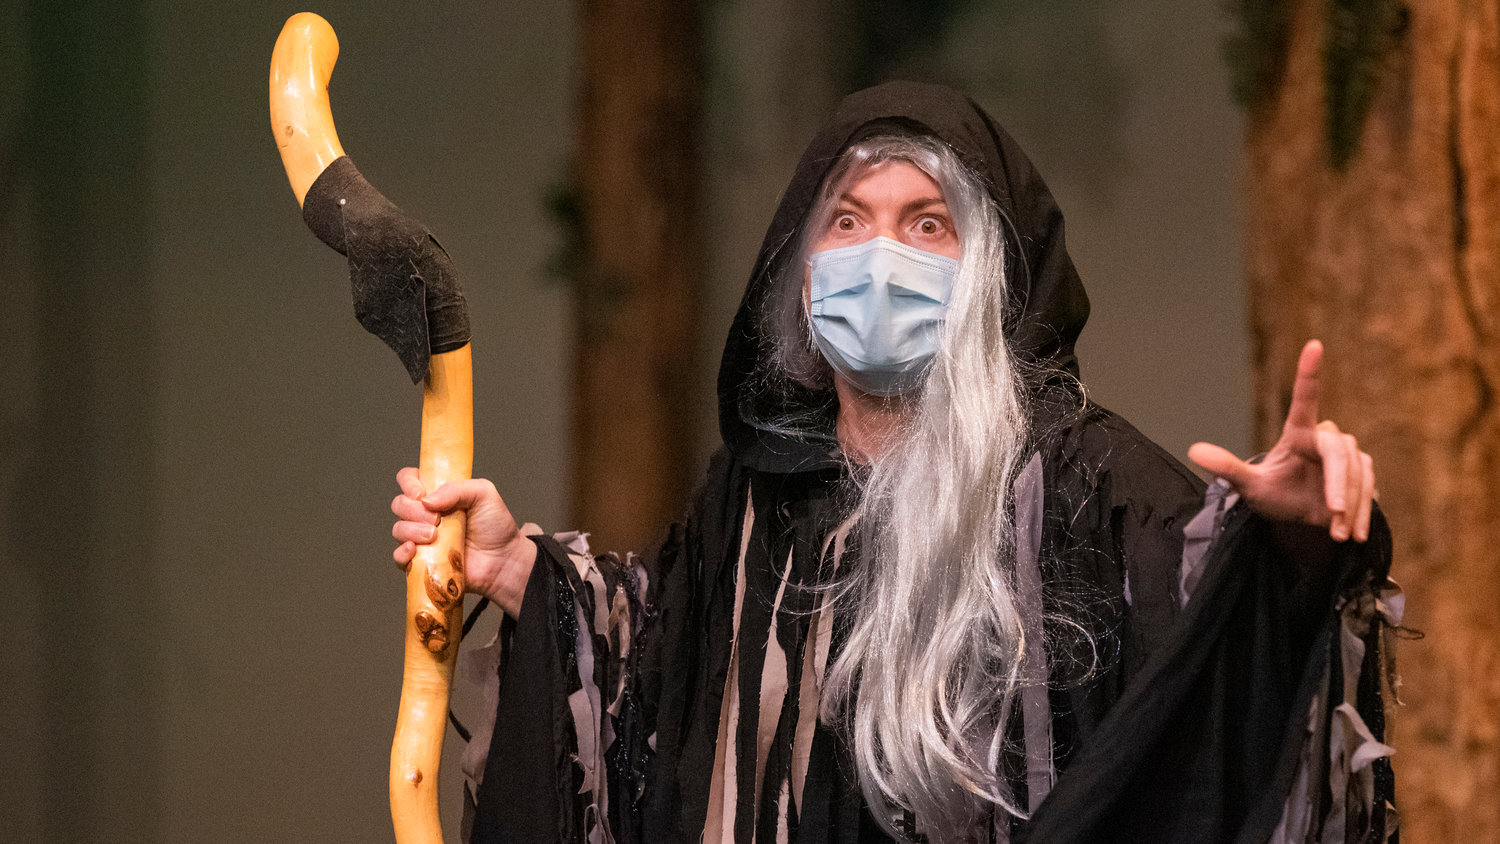 Heather Matthews gestures while playing The Witch during dress rehearsals for “Into The Woods,” presented by the Centralia College Theatre program.